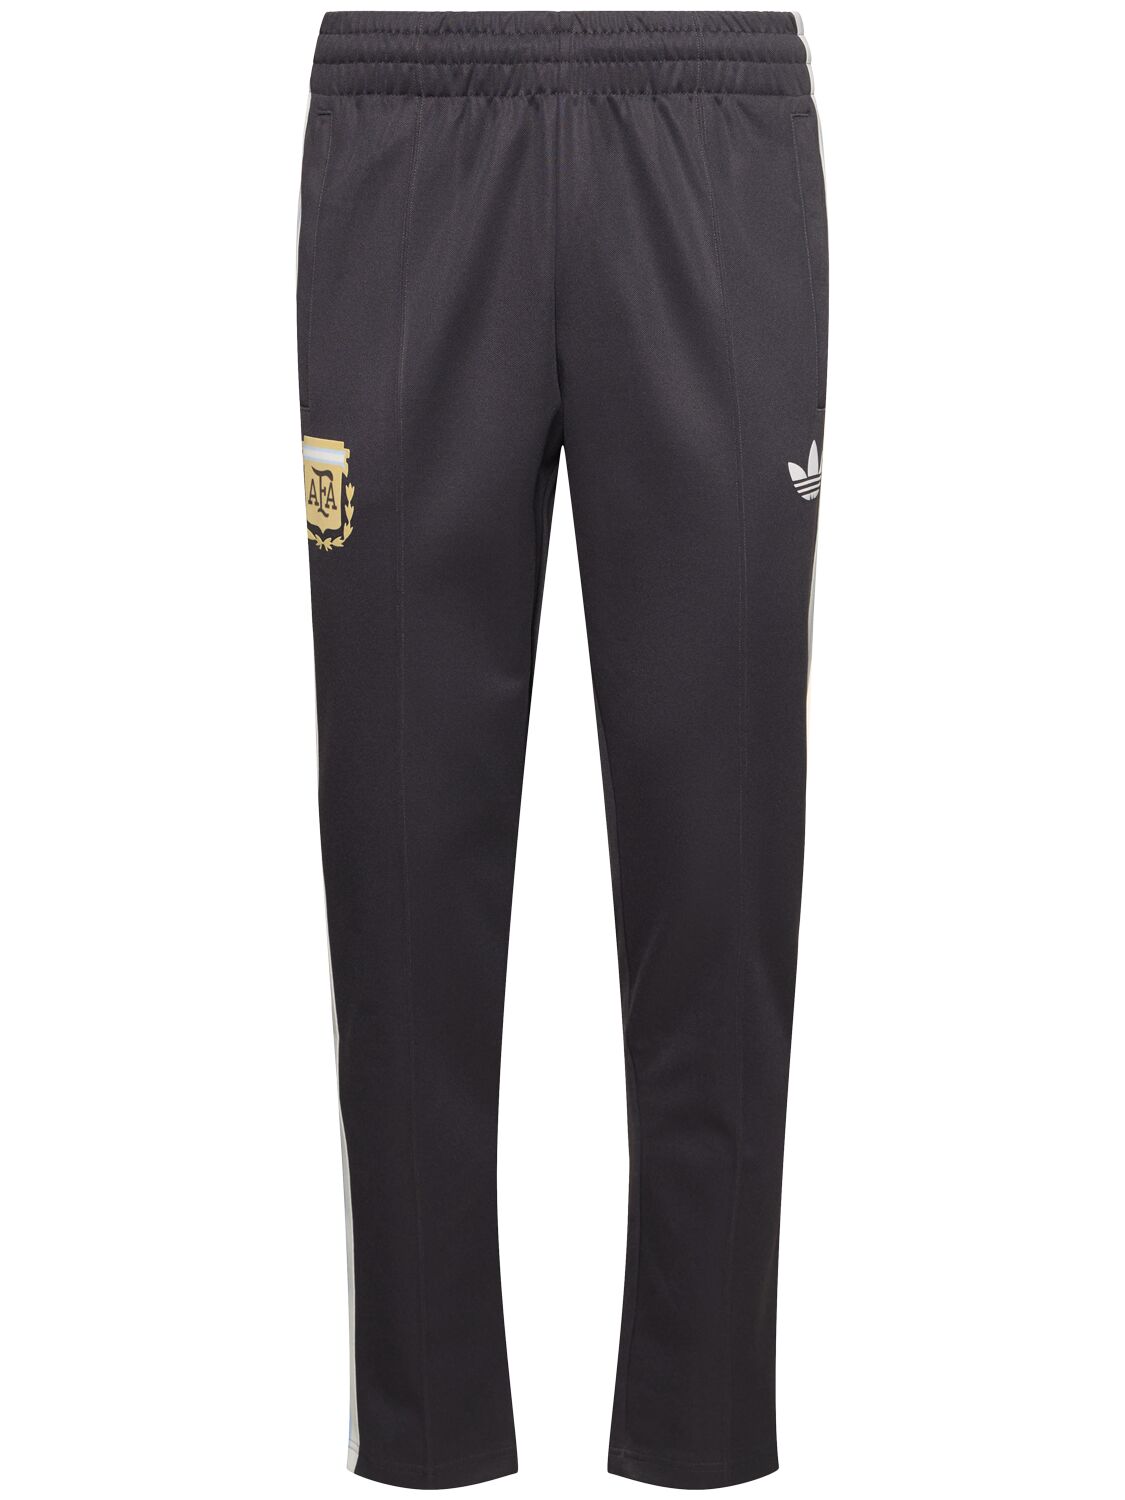 Image of Argentina Track Pants